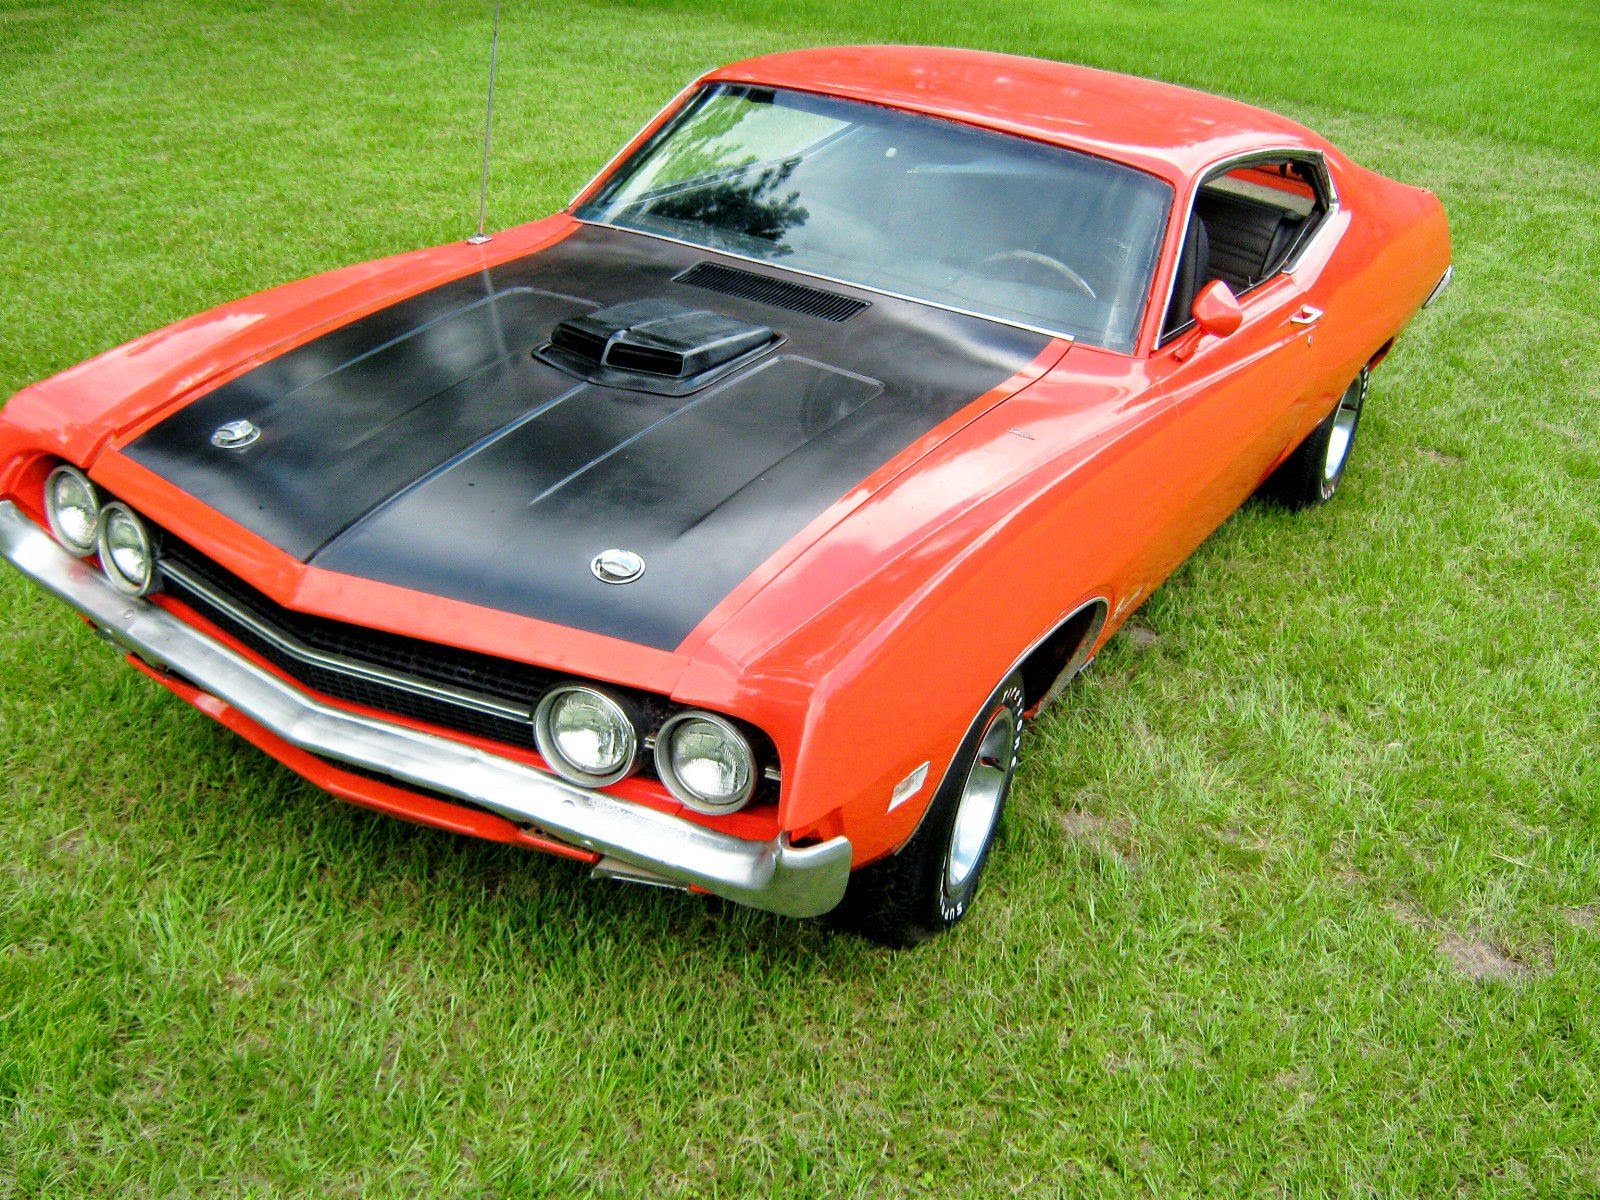 Ford Torino Muscle Classic Wallpapers Hd Desktop And Mobile